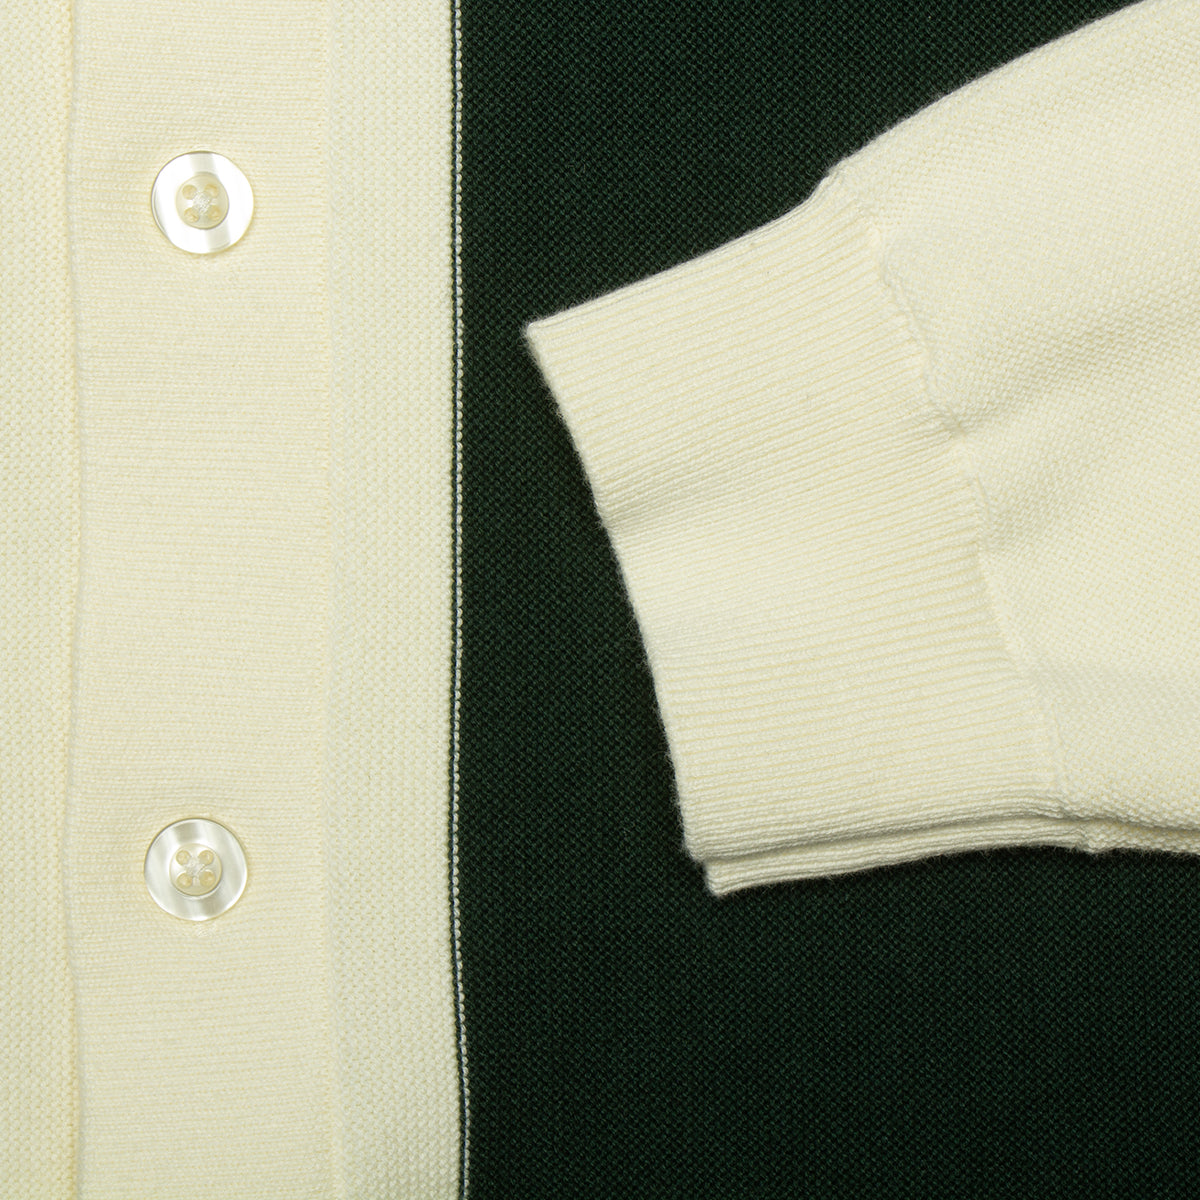 Grand Collection | Knit Button-Up Sweater Color : Cream / Forest